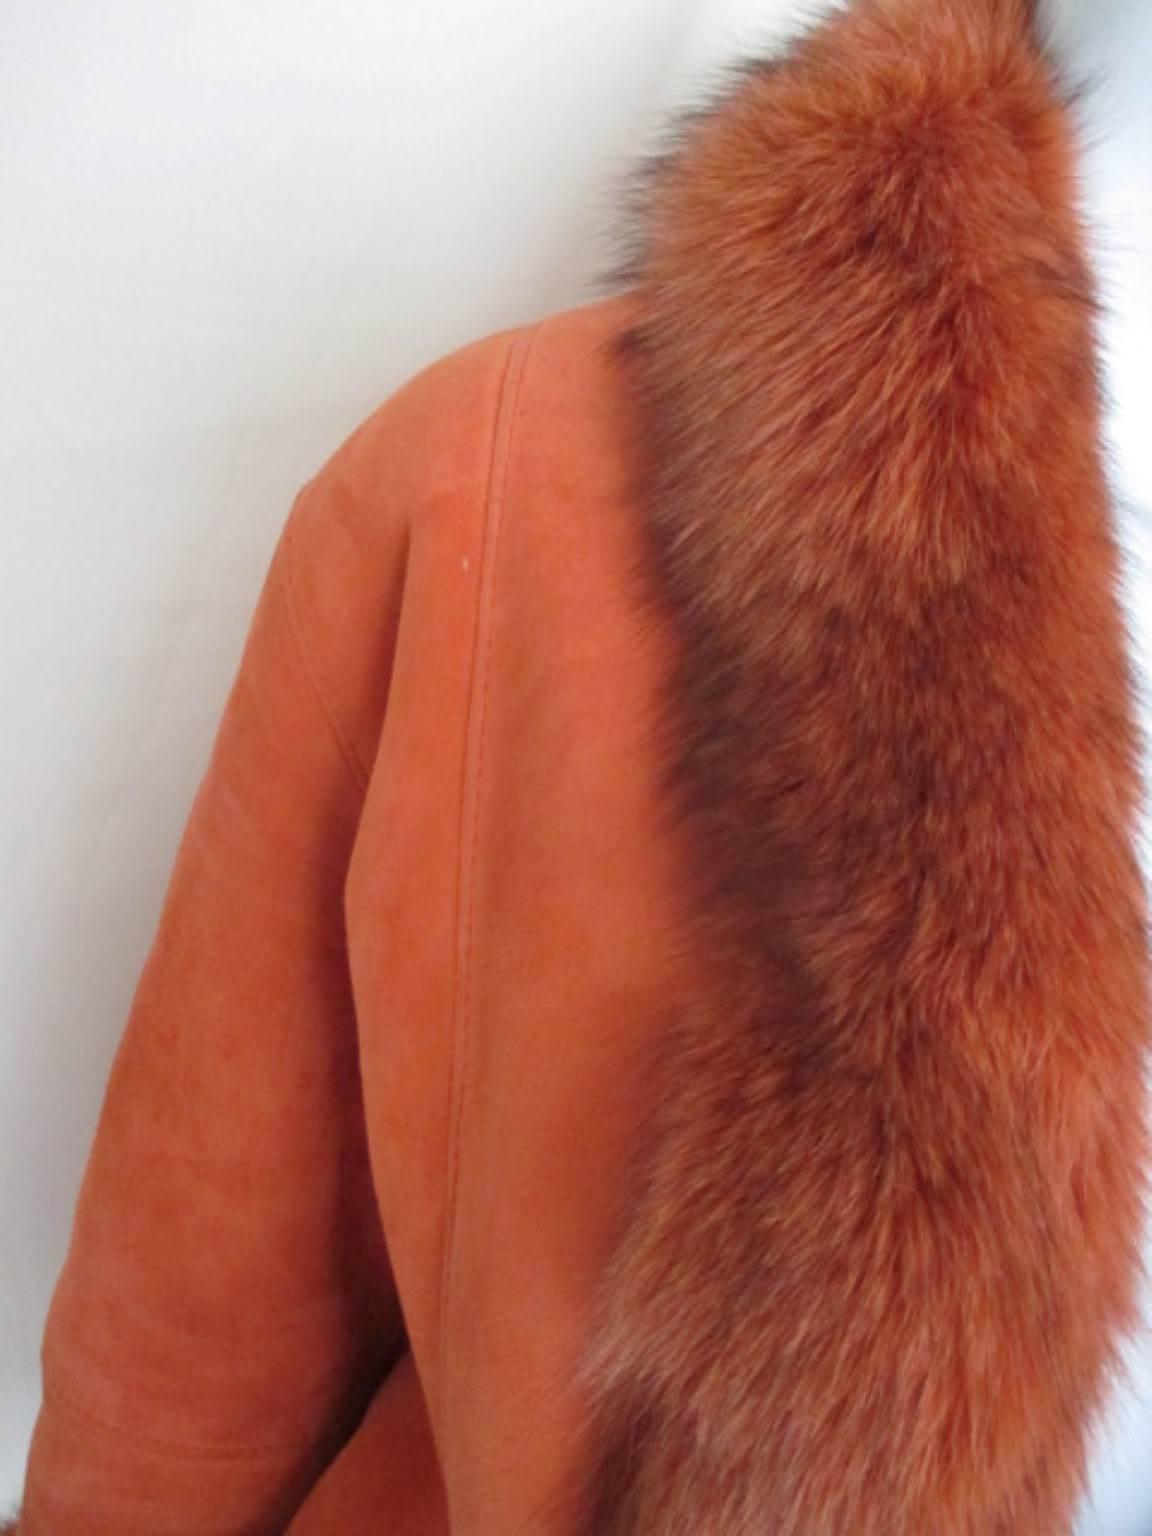 This jacket is made of very soft suede shearling and trimmed with dyed orange fox fur.
It has 2 buttons and no pockets.
Its in good vintage condition with some wear at the suede leather
Size fits as small/medium, see section measurements.

Please